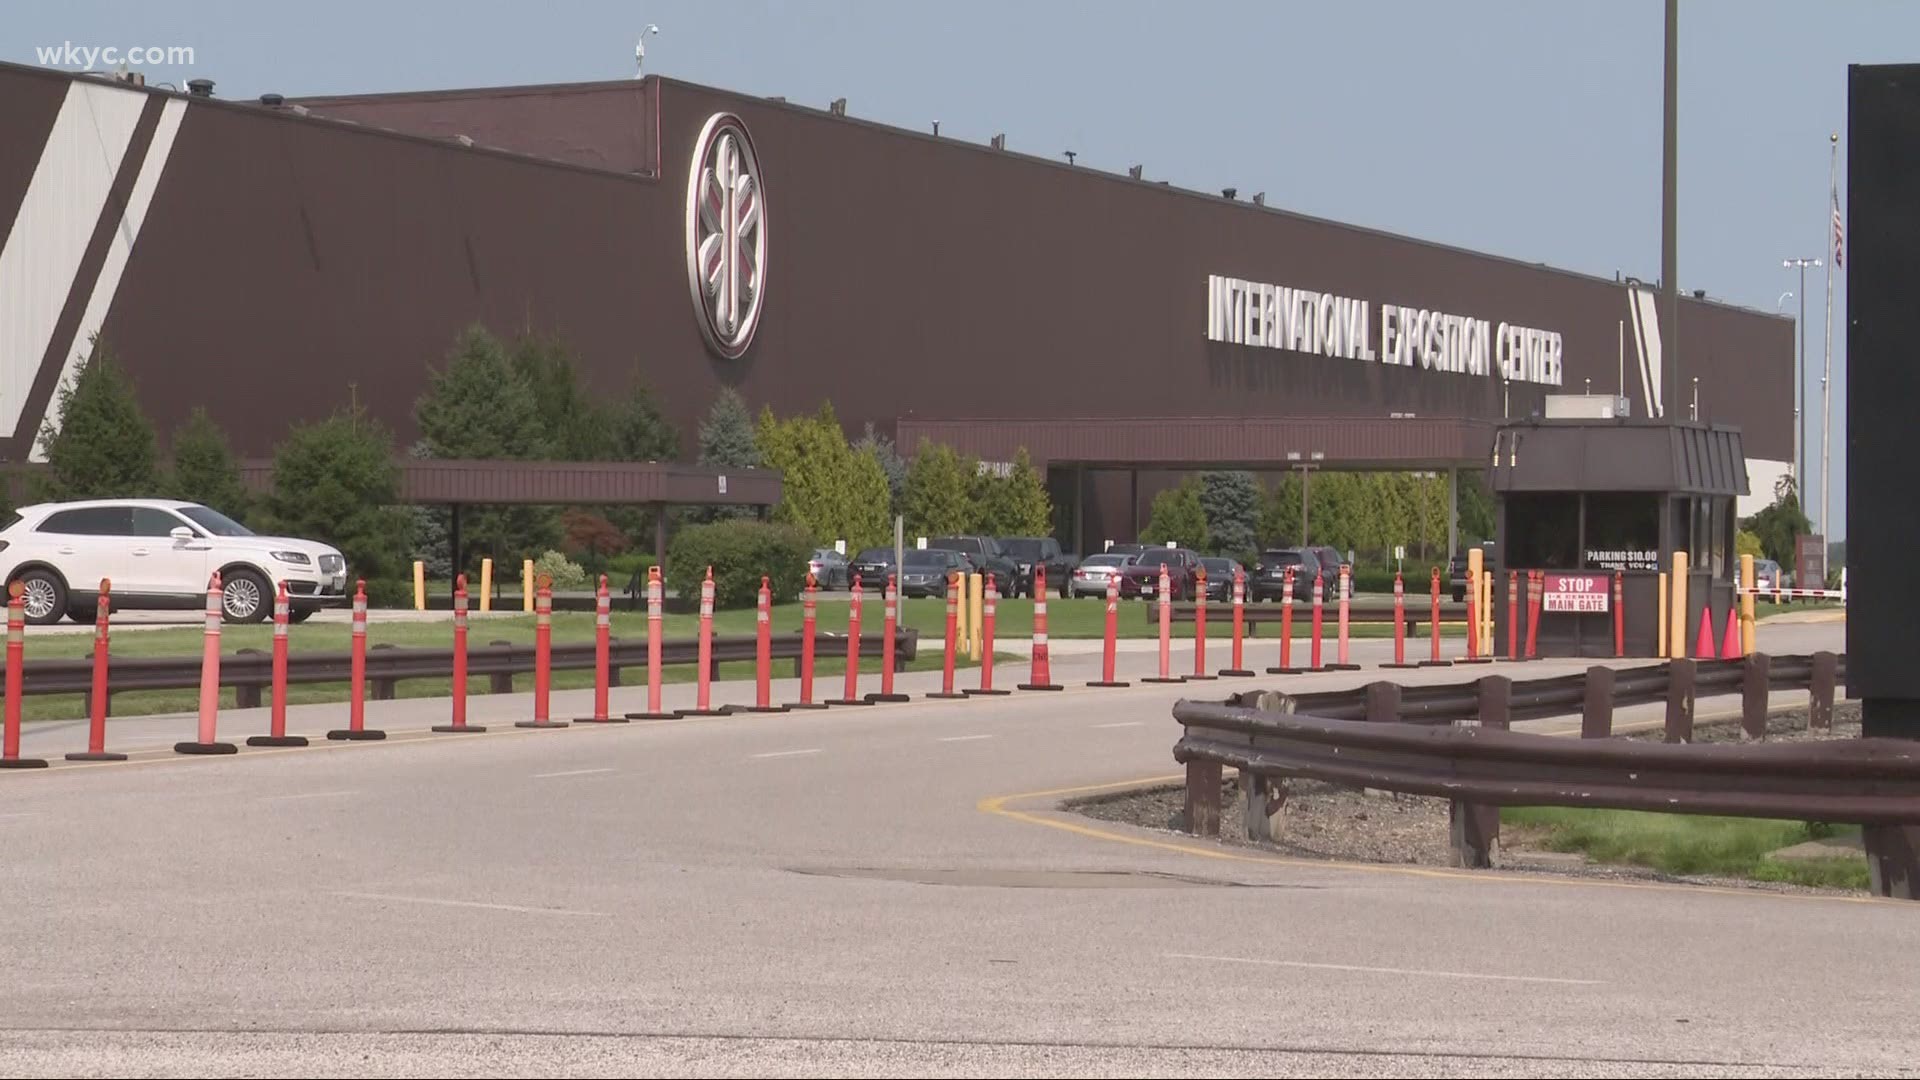 The I-X Center has been hosting major events in Cleveland since 1985. 3News' Brandon Simmons has what's next for the space.